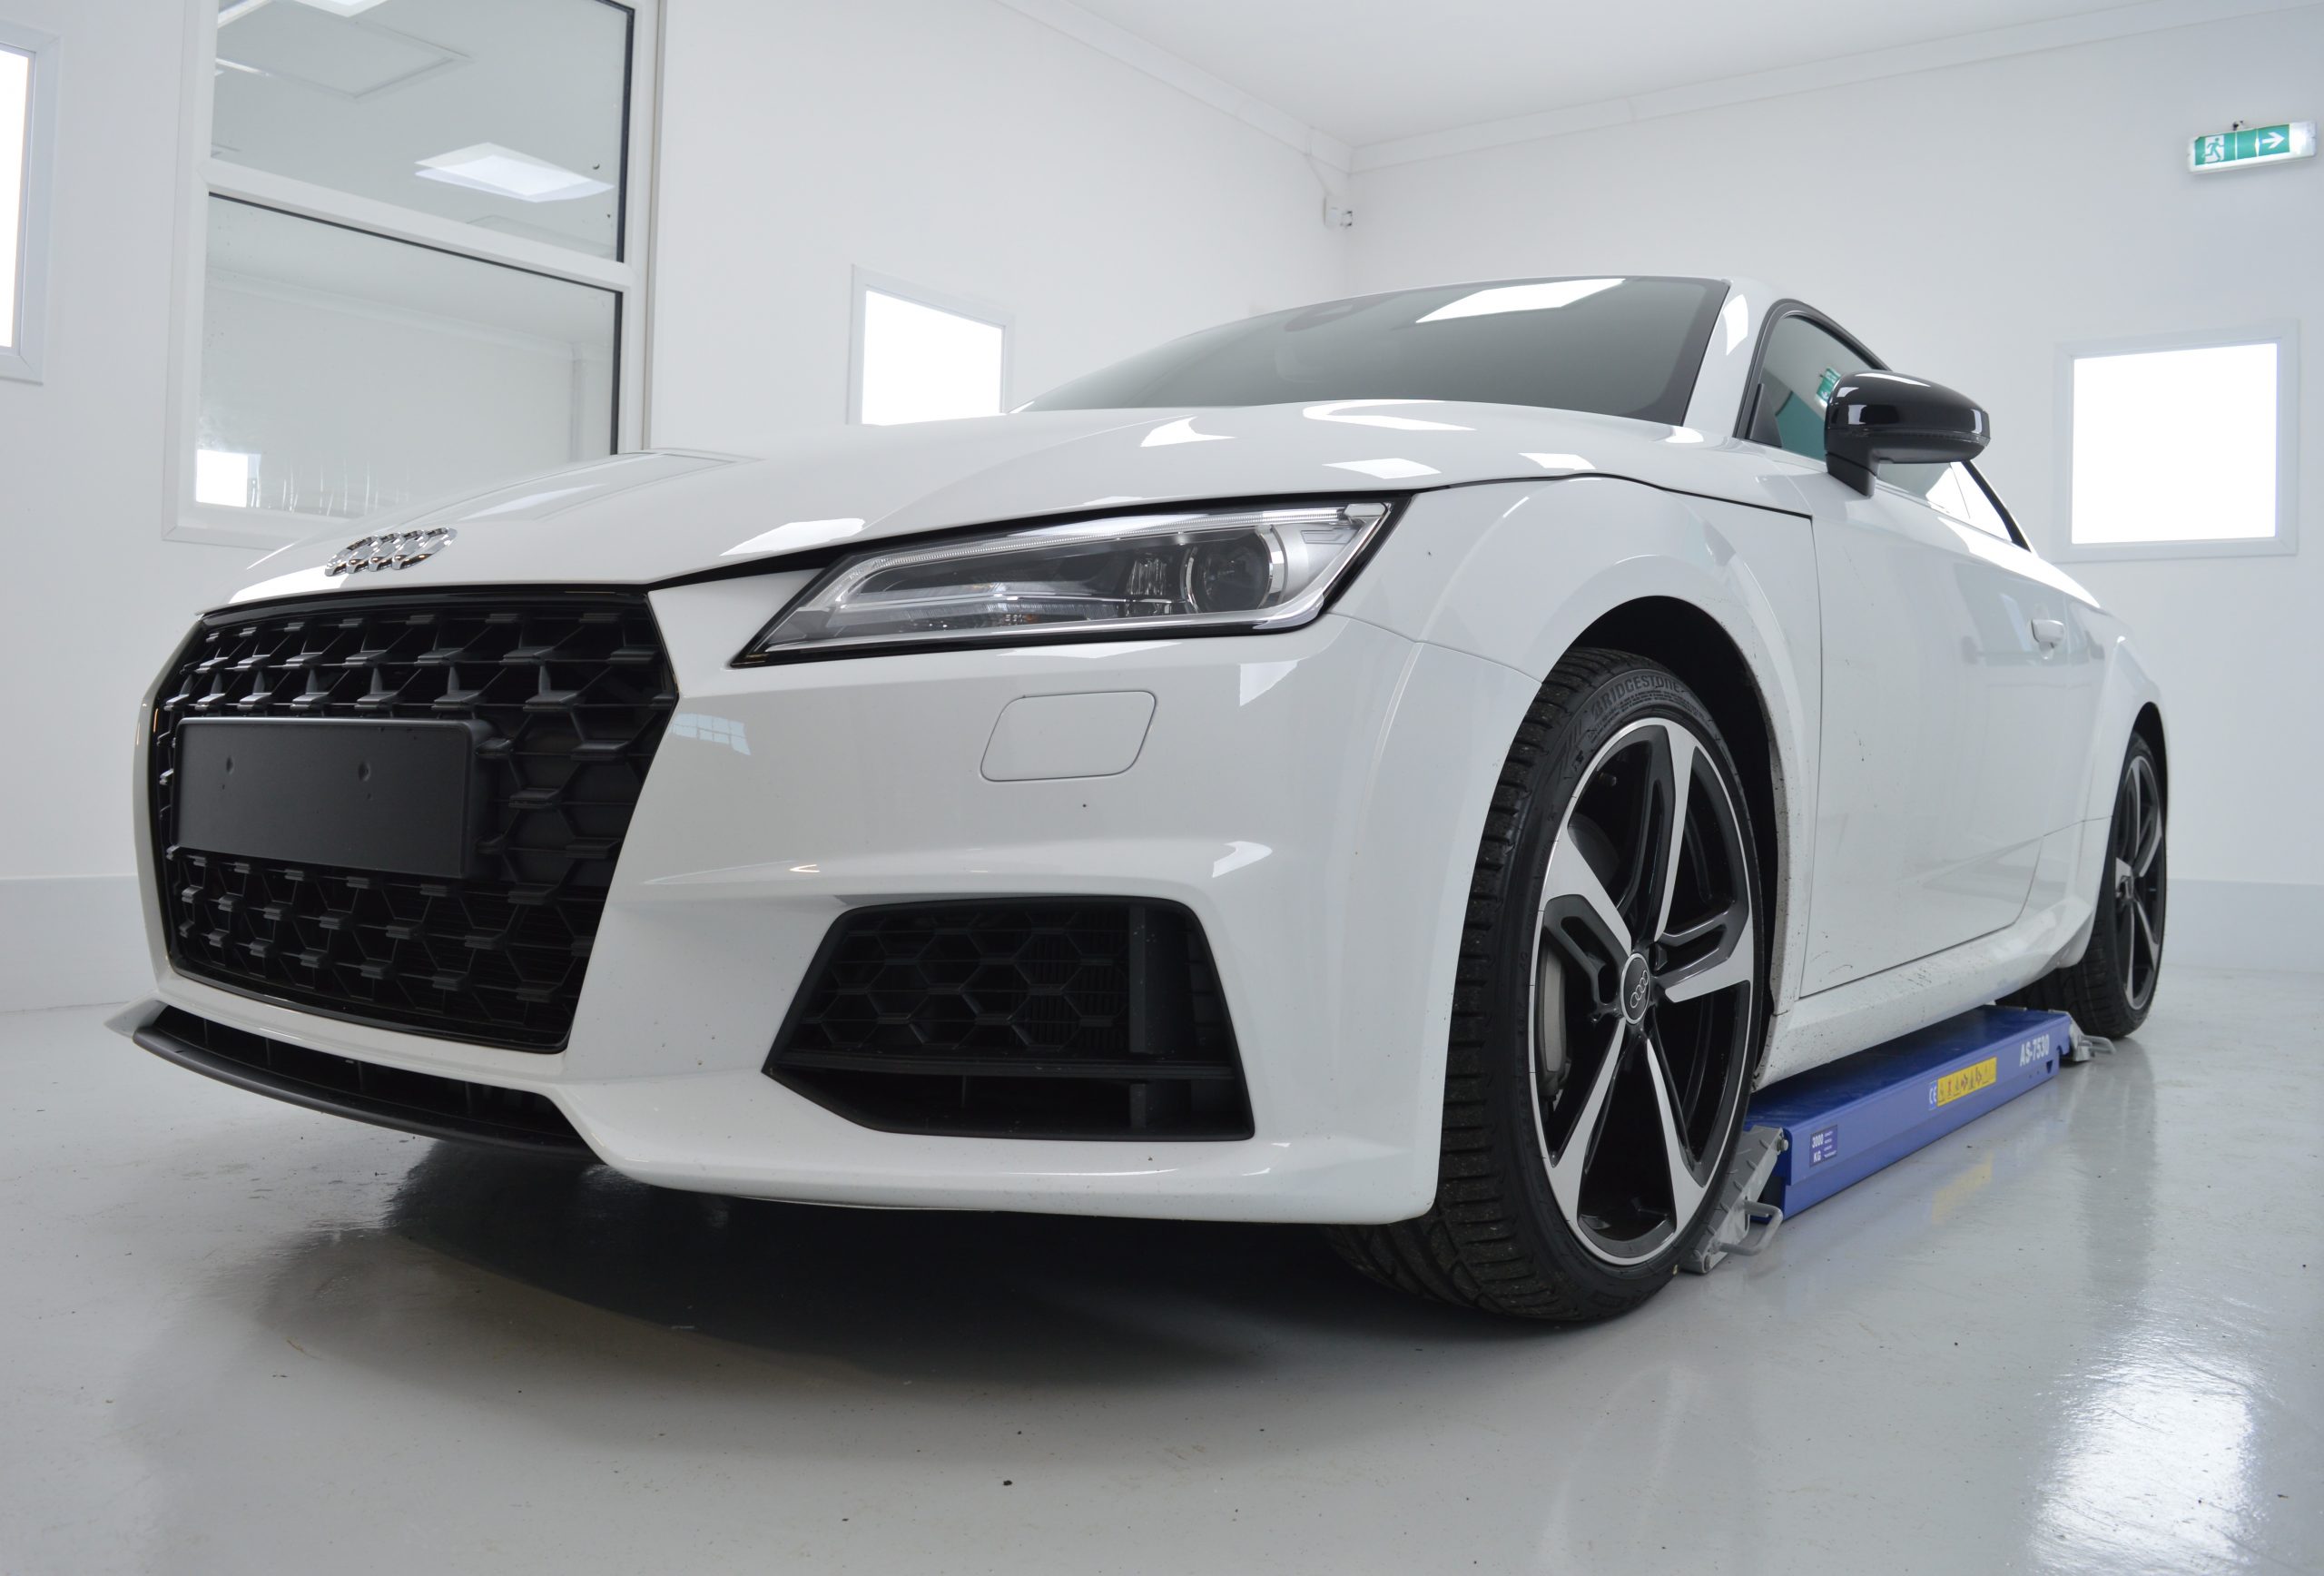 Paint Protection Film - Primo Protective Films